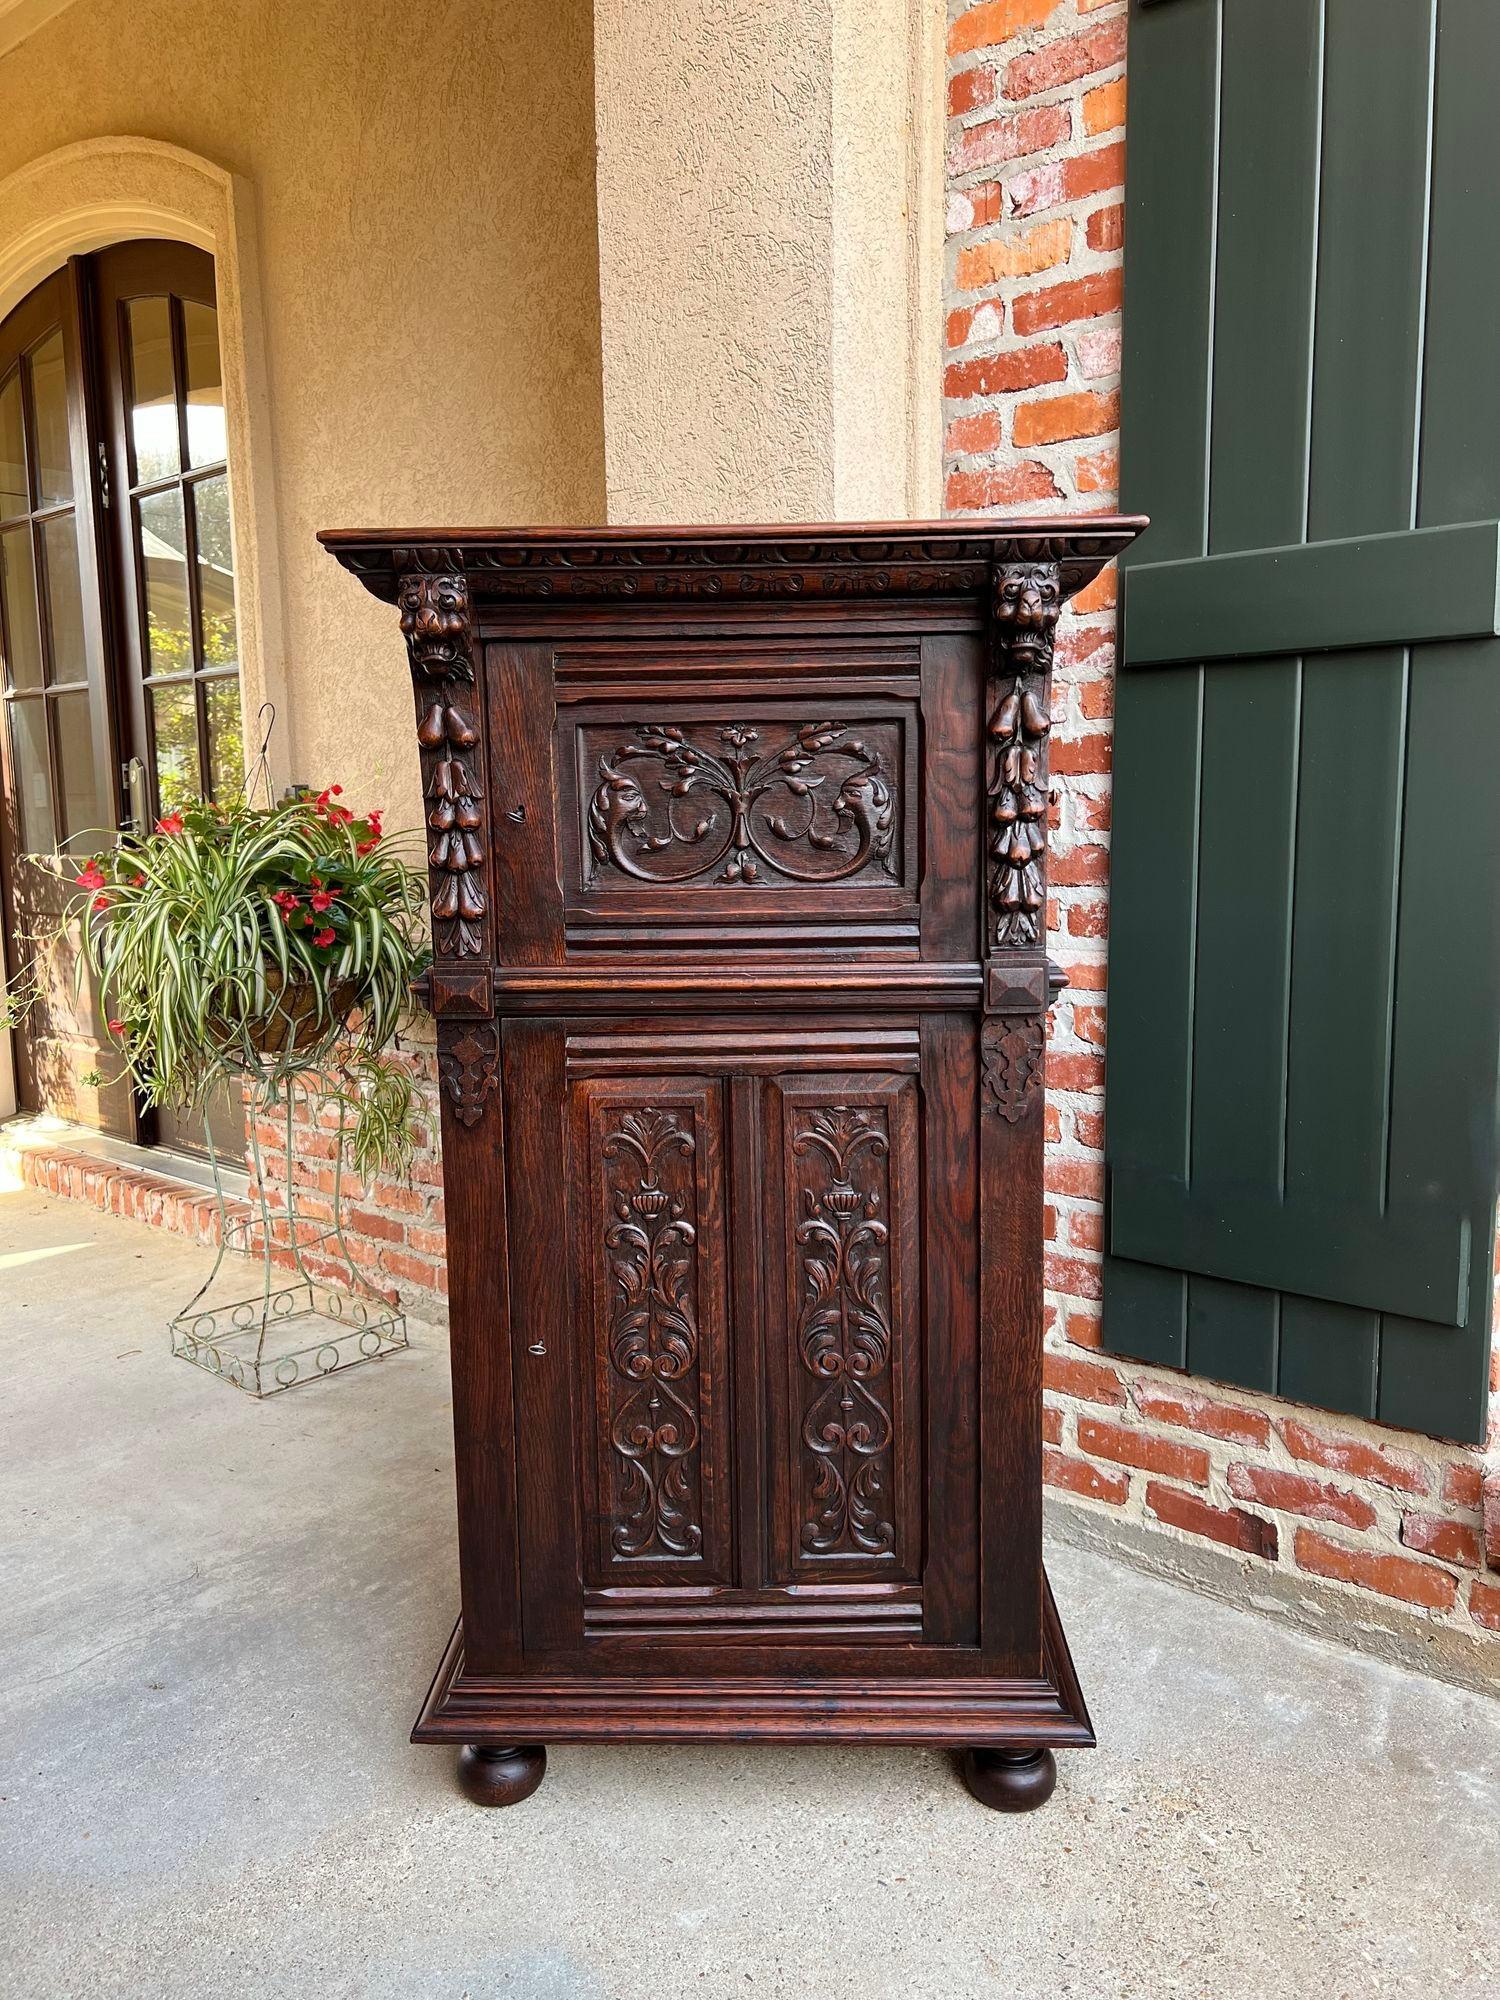 Antique French Cabinet Renaissance carved oak bookcase wine cellarette sideboard.

Directly imported from France, another beautifully hand carved antique cabinet, in a versatile taller size, with unique features! Lavish carvings include columns of